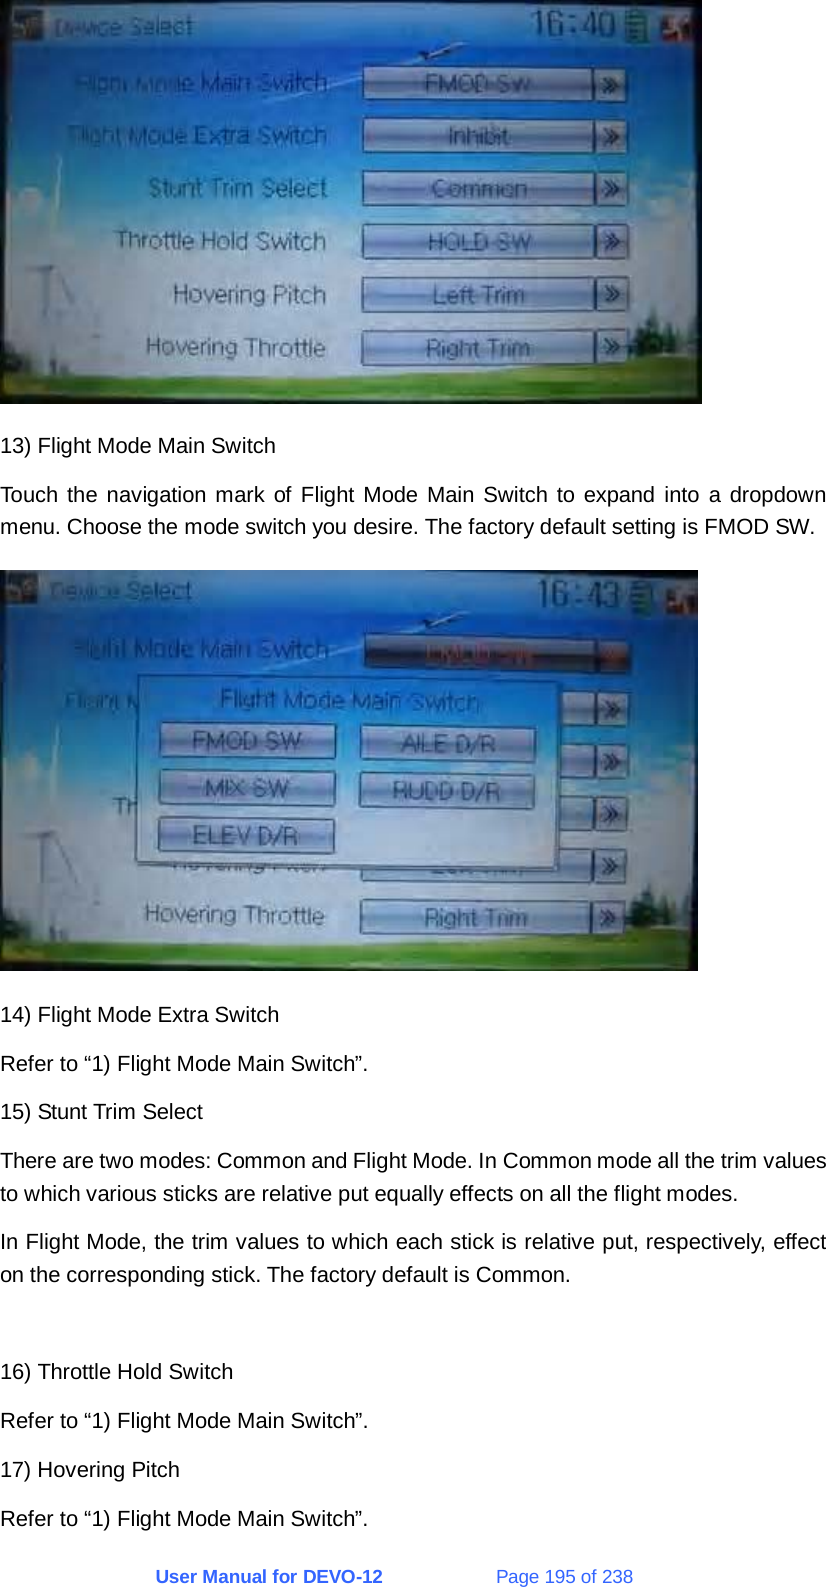 User Manual for DEVO-12             Page 195 of 238  13) Flight Mode Main Switch Touch the navigation mark of Flight Mode Main Switch to expand into a dropdown menu. Choose the mode switch you desire. The factory default setting is FMOD SW.  14) Flight Mode Extra Switch Refer to “1) Flight Mode Main Switch”. 15) Stunt Trim Select There are two modes: Common and Flight Mode. In Common mode all the trim values to which various sticks are relative put equally effects on all the flight modes. In Flight Mode, the trim values to which each stick is relative put, respectively, effect on the corresponding stick. The factory default is Common.  16) Throttle Hold Switch Refer to “1) Flight Mode Main Switch”. 17) Hovering Pitch Refer to “1) Flight Mode Main Switch”. 